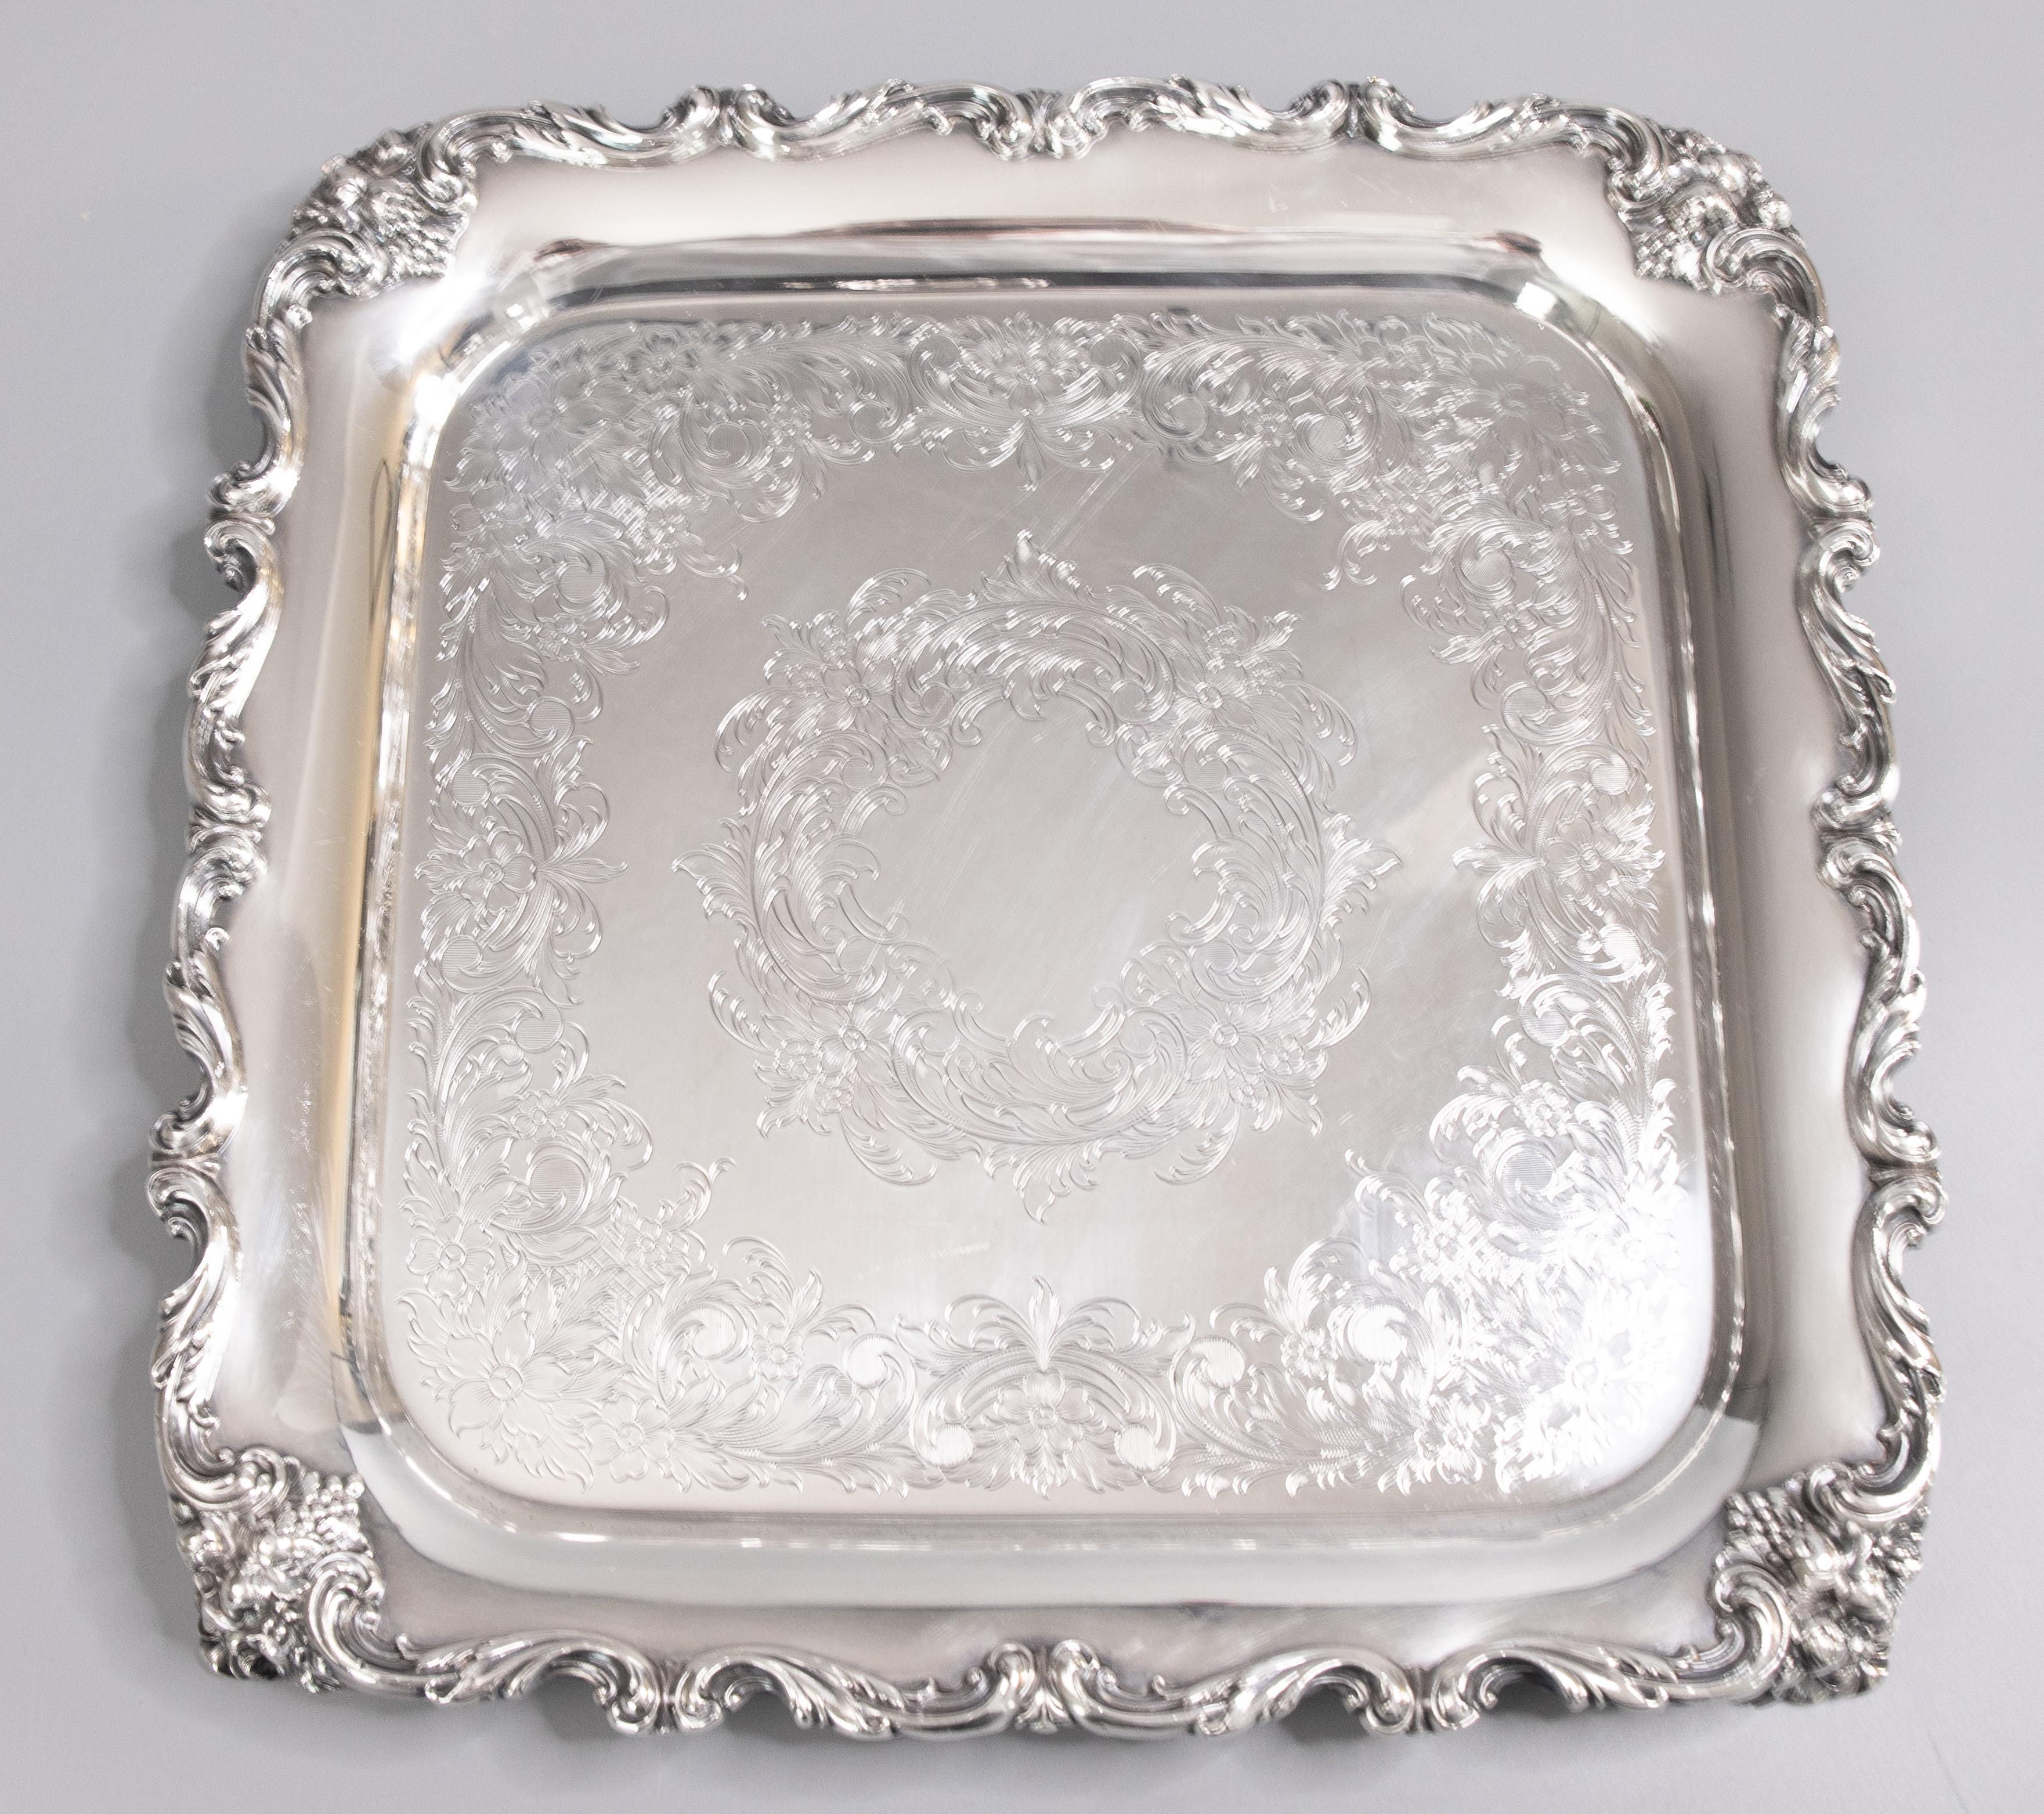 A lovely midcentury silverplate footed serving tray by International Silver Co. Maker's mark on reverse. This fine quality silver tray is well made and heavy with gorgeous chasing, an ornate scrolling grape vine border, and floral garland decorative